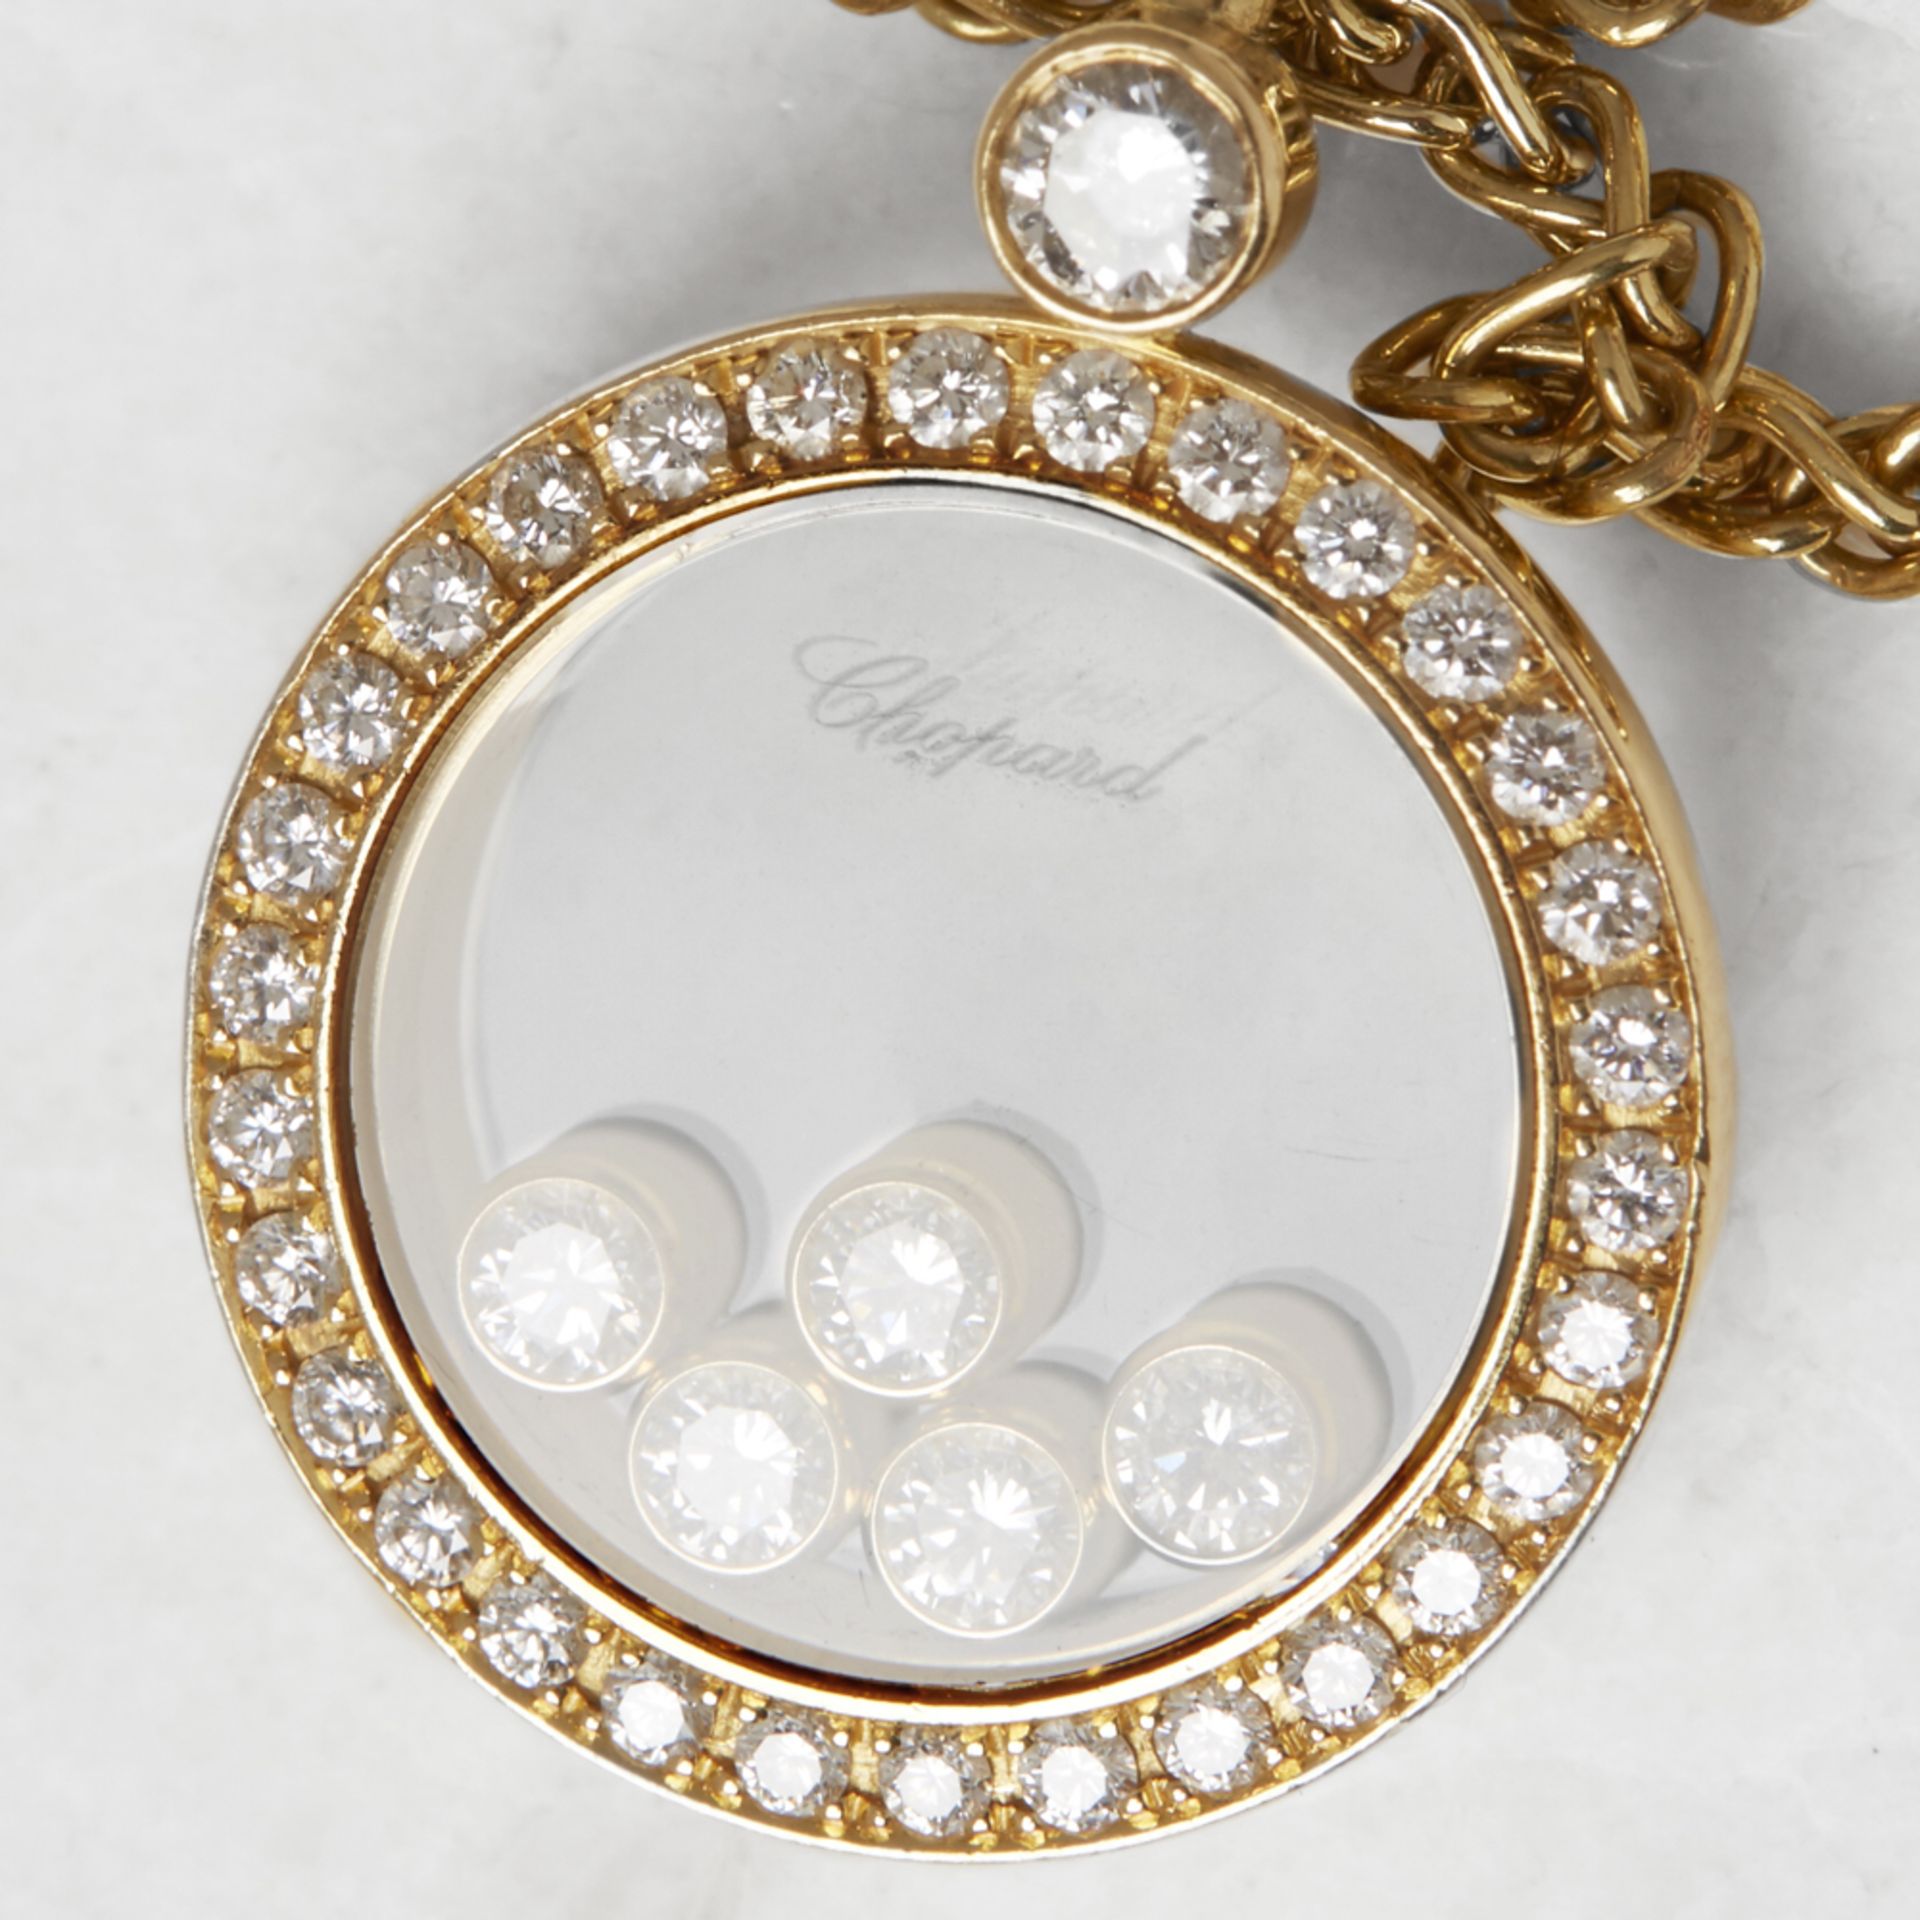 Chopard 18k Yellow Gold Happy Diamonds Necklace - Image 2 of 6